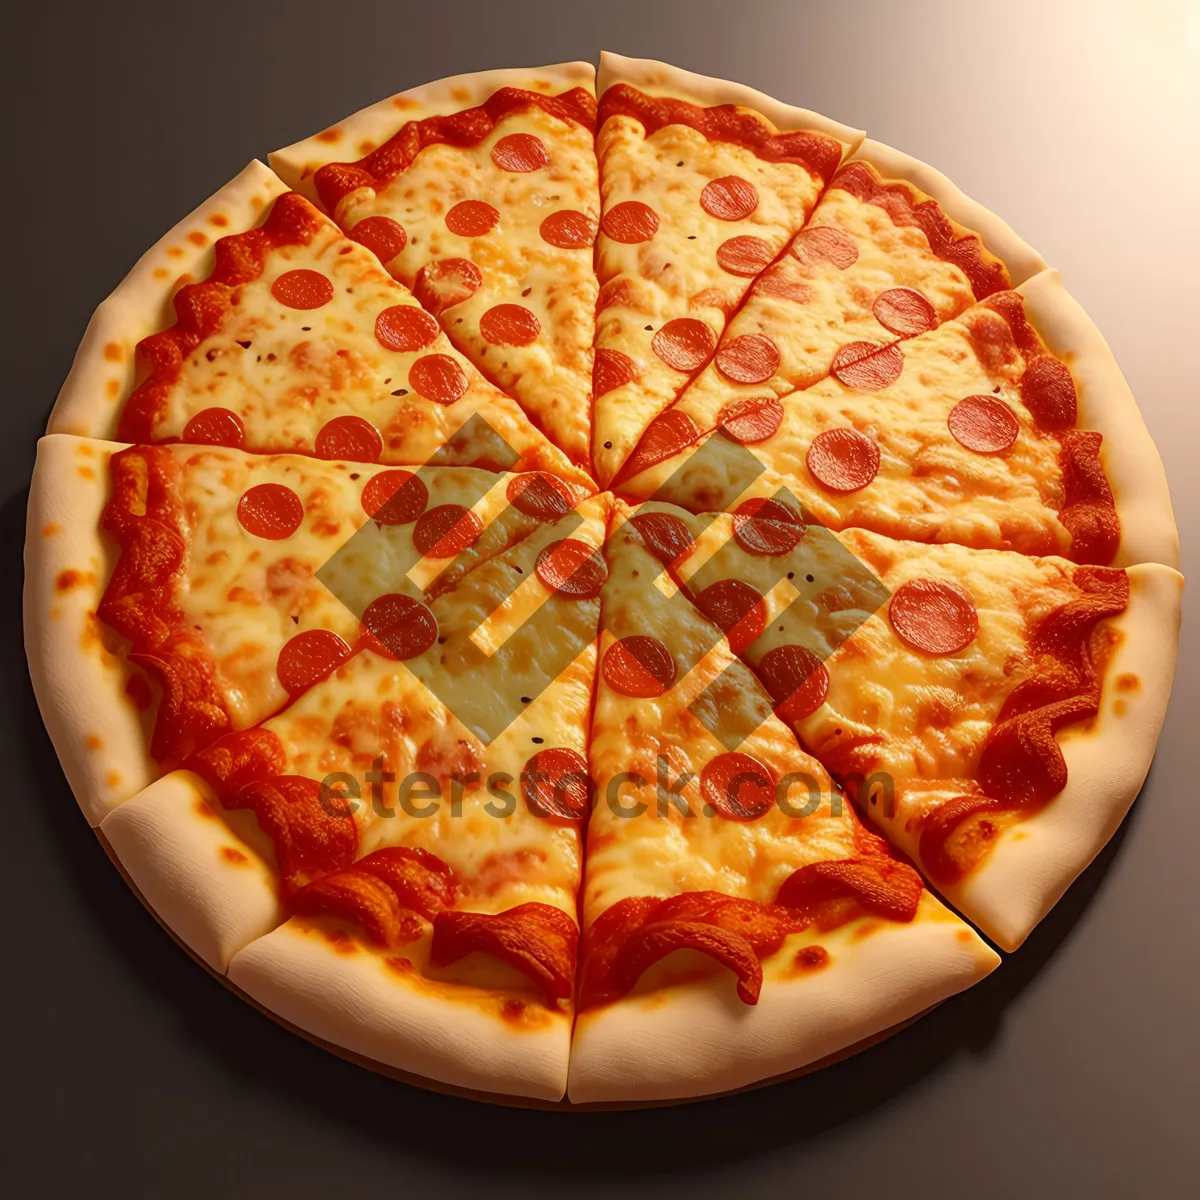 Picture of Delicious Gourmet Pizza with Melting Cheese and Tasty Toppings